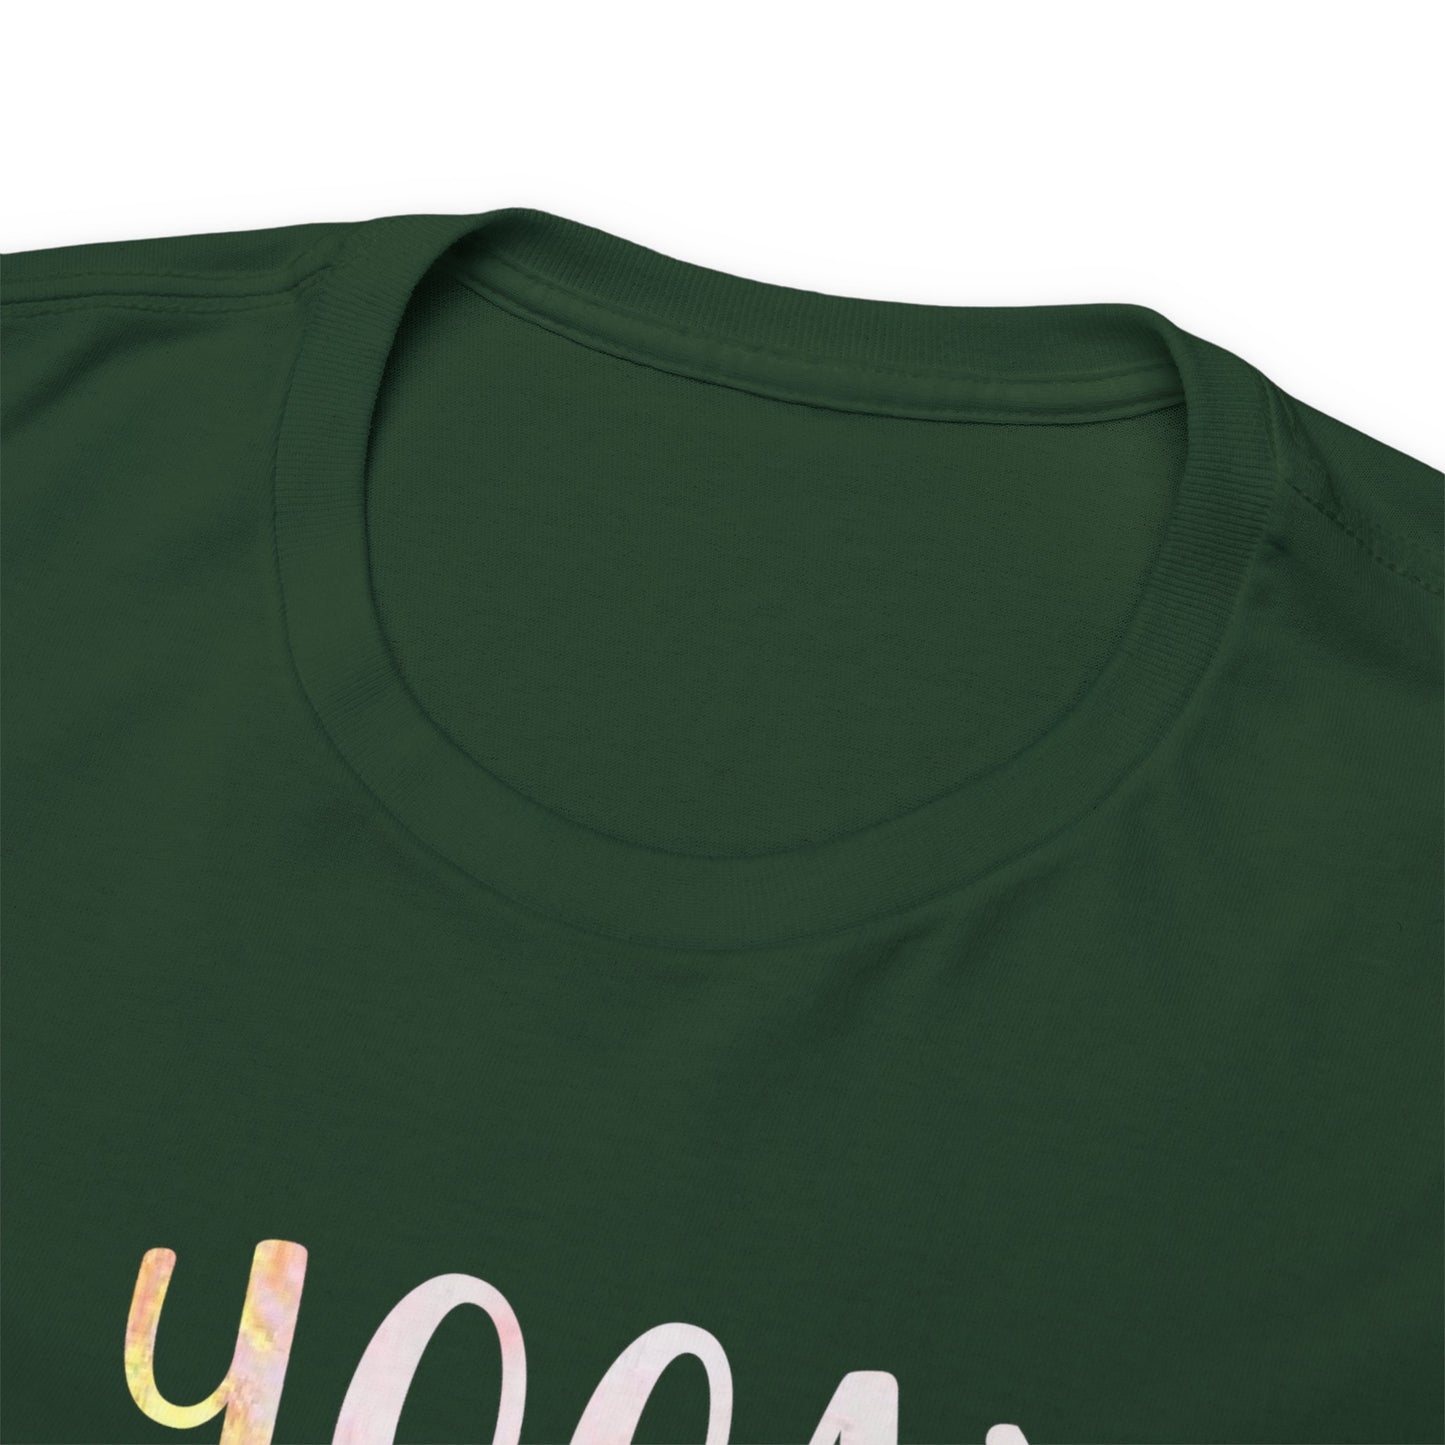 Yoga Because Adulting is Hard' T-Shirt - Embrace Comfort and Ease! Unisex Heavy Cotton Tee